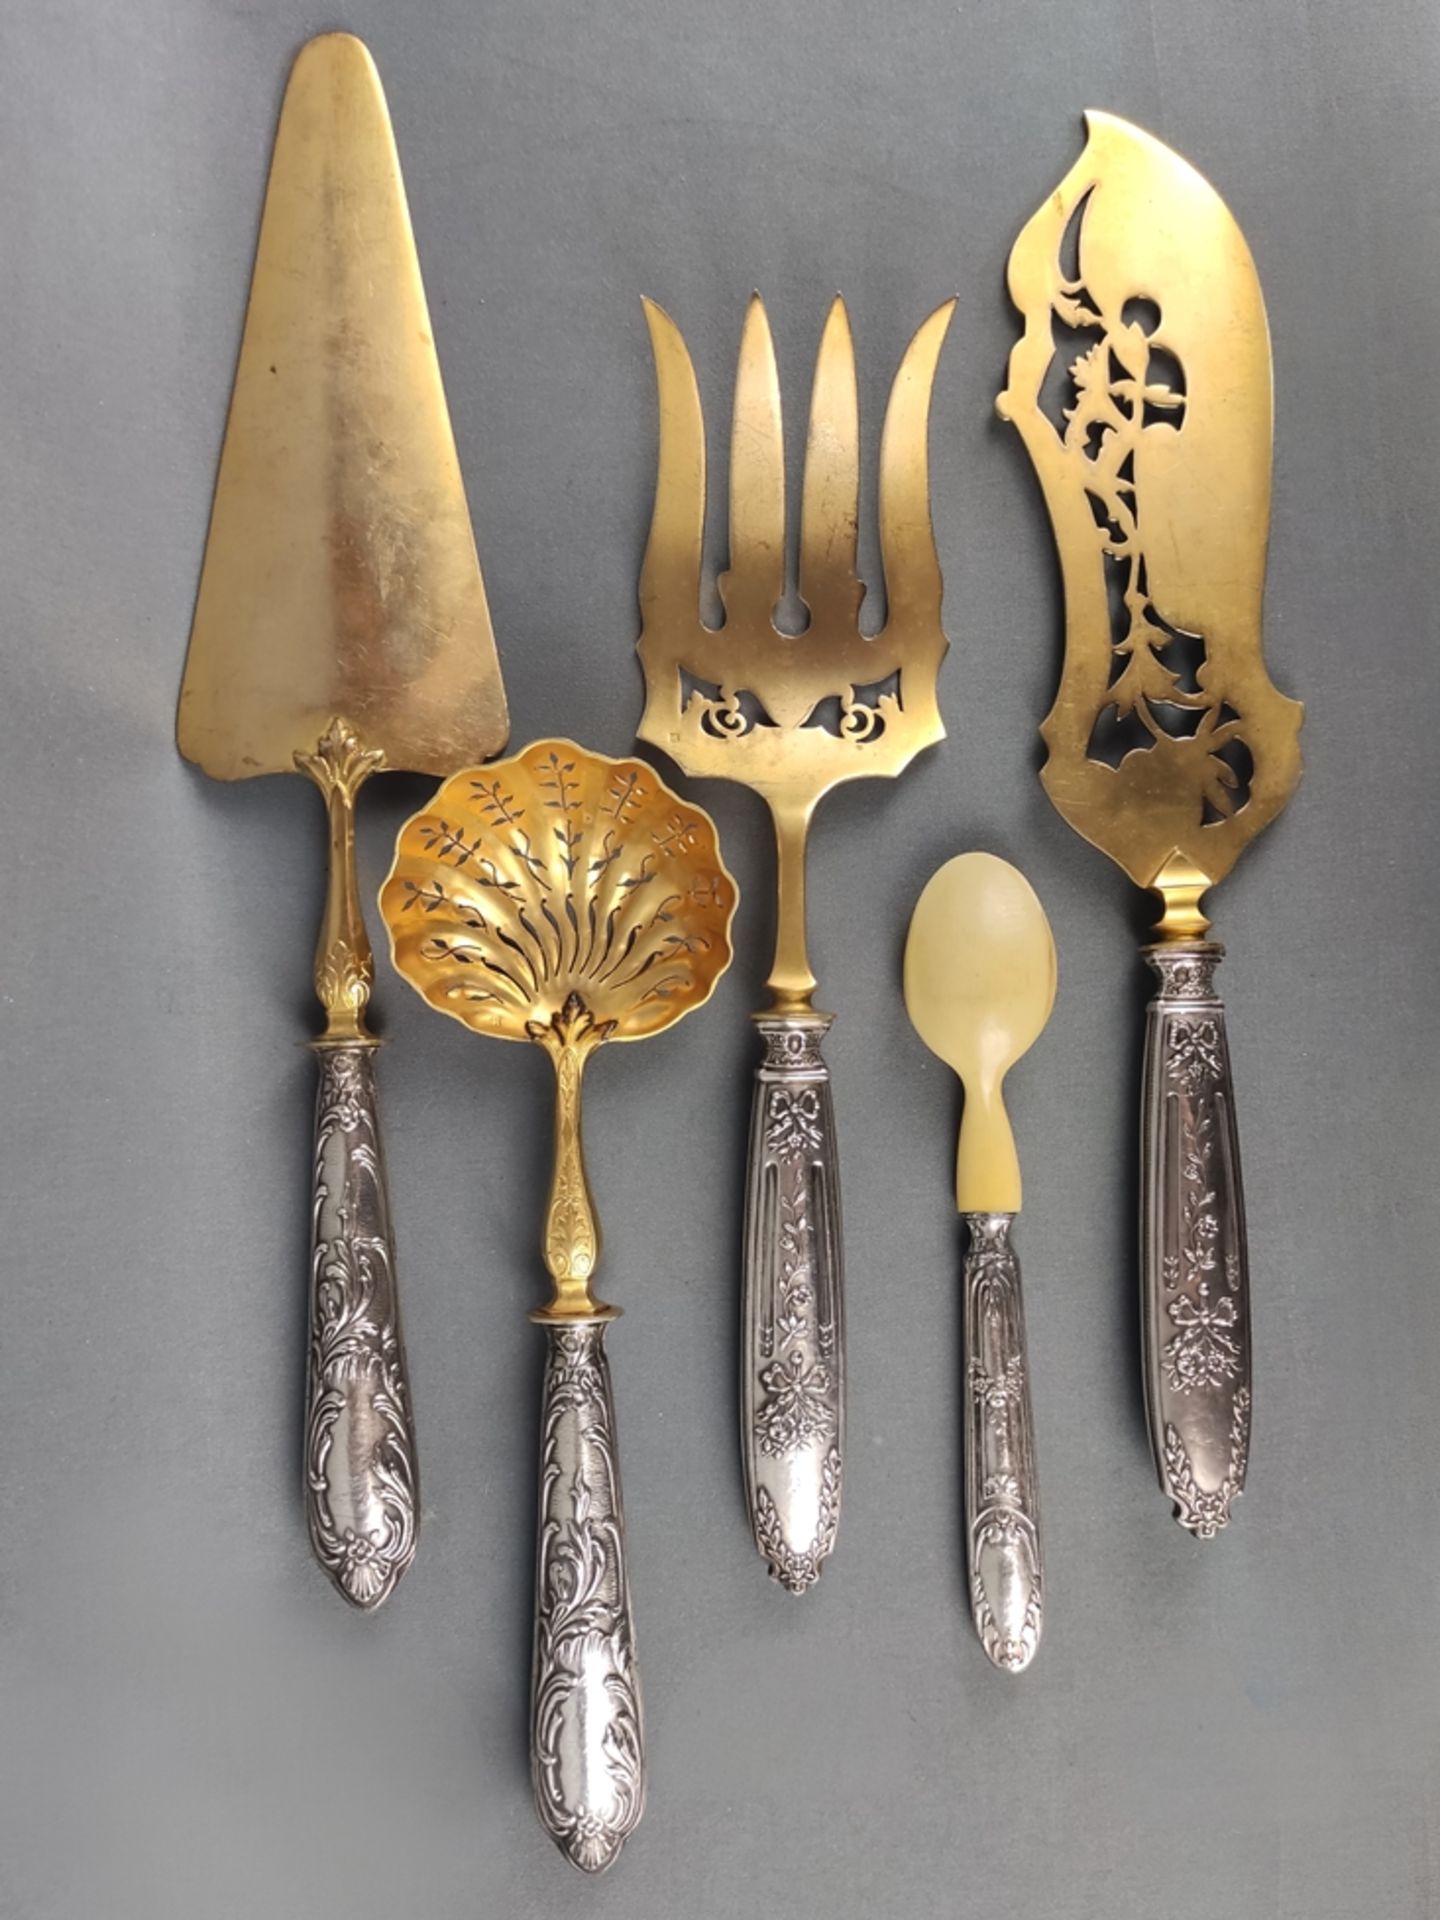 Serving cutlery, 5 pieces, France, Paris, Joseph Crossard, 19th/ 20th century, 4 matching, one misc - Image 2 of 3